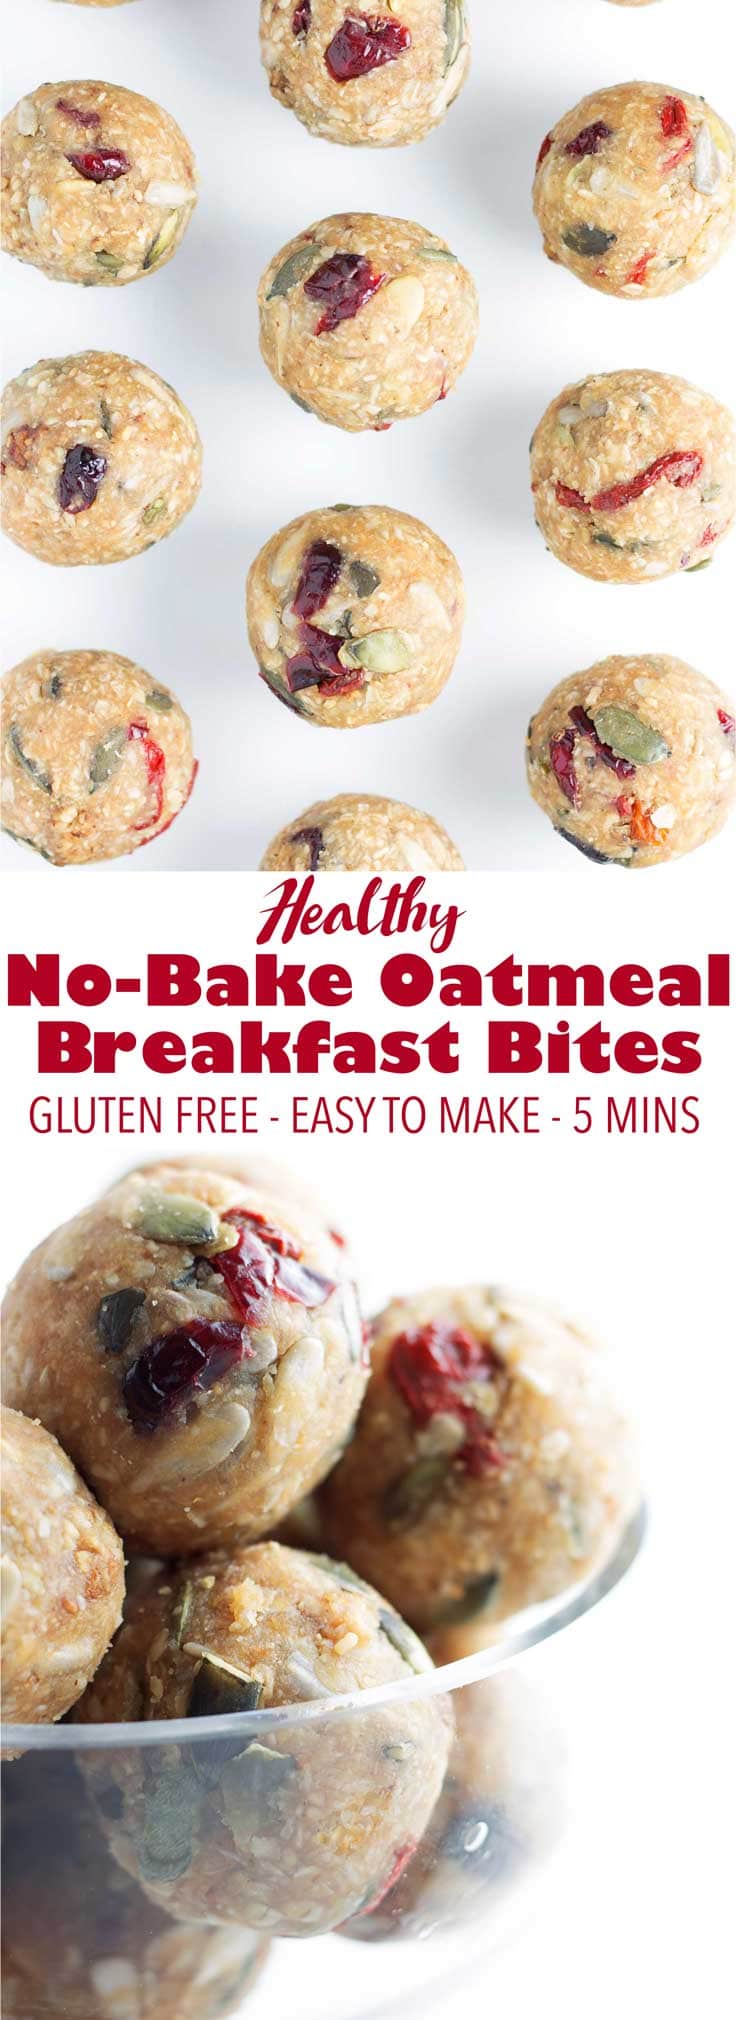 Perfect for a quick breakfast or snack! A mixture of oats, nuts, seeds, and berries, these no-bake breakfast bites are easy to make, gluten free, and vegan!